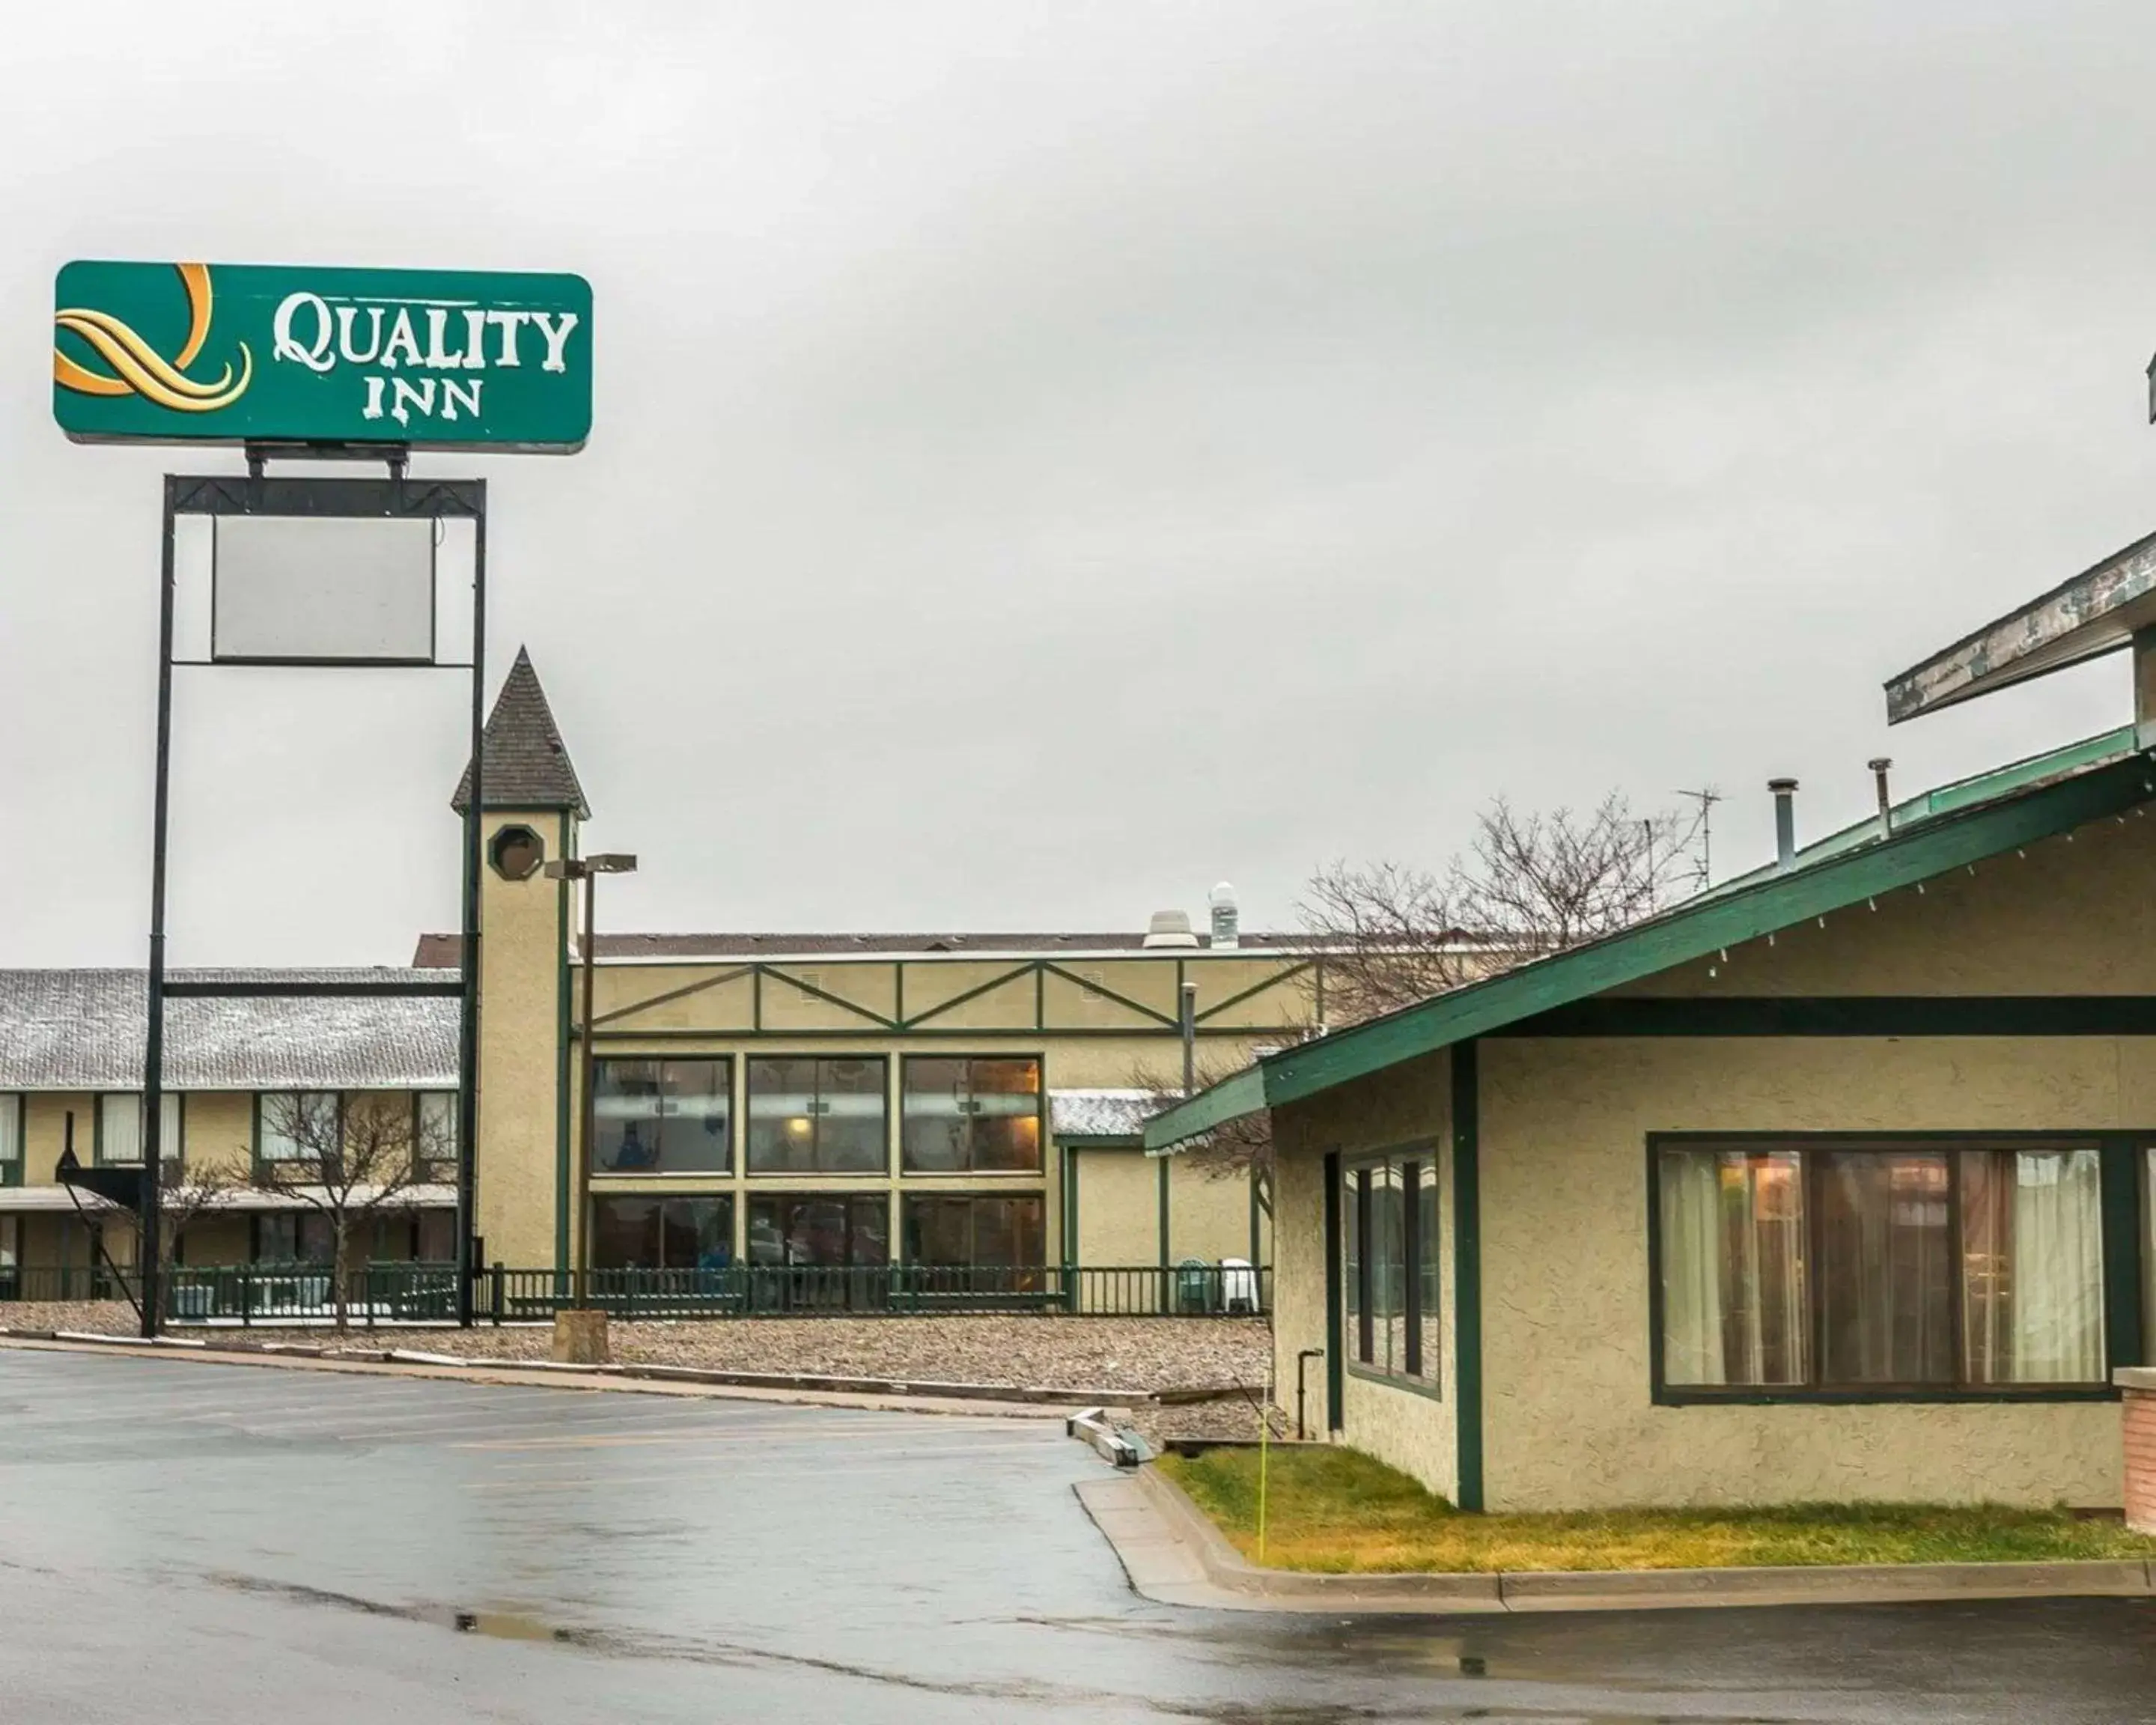 Property Building in Quality Inn of Gaylord